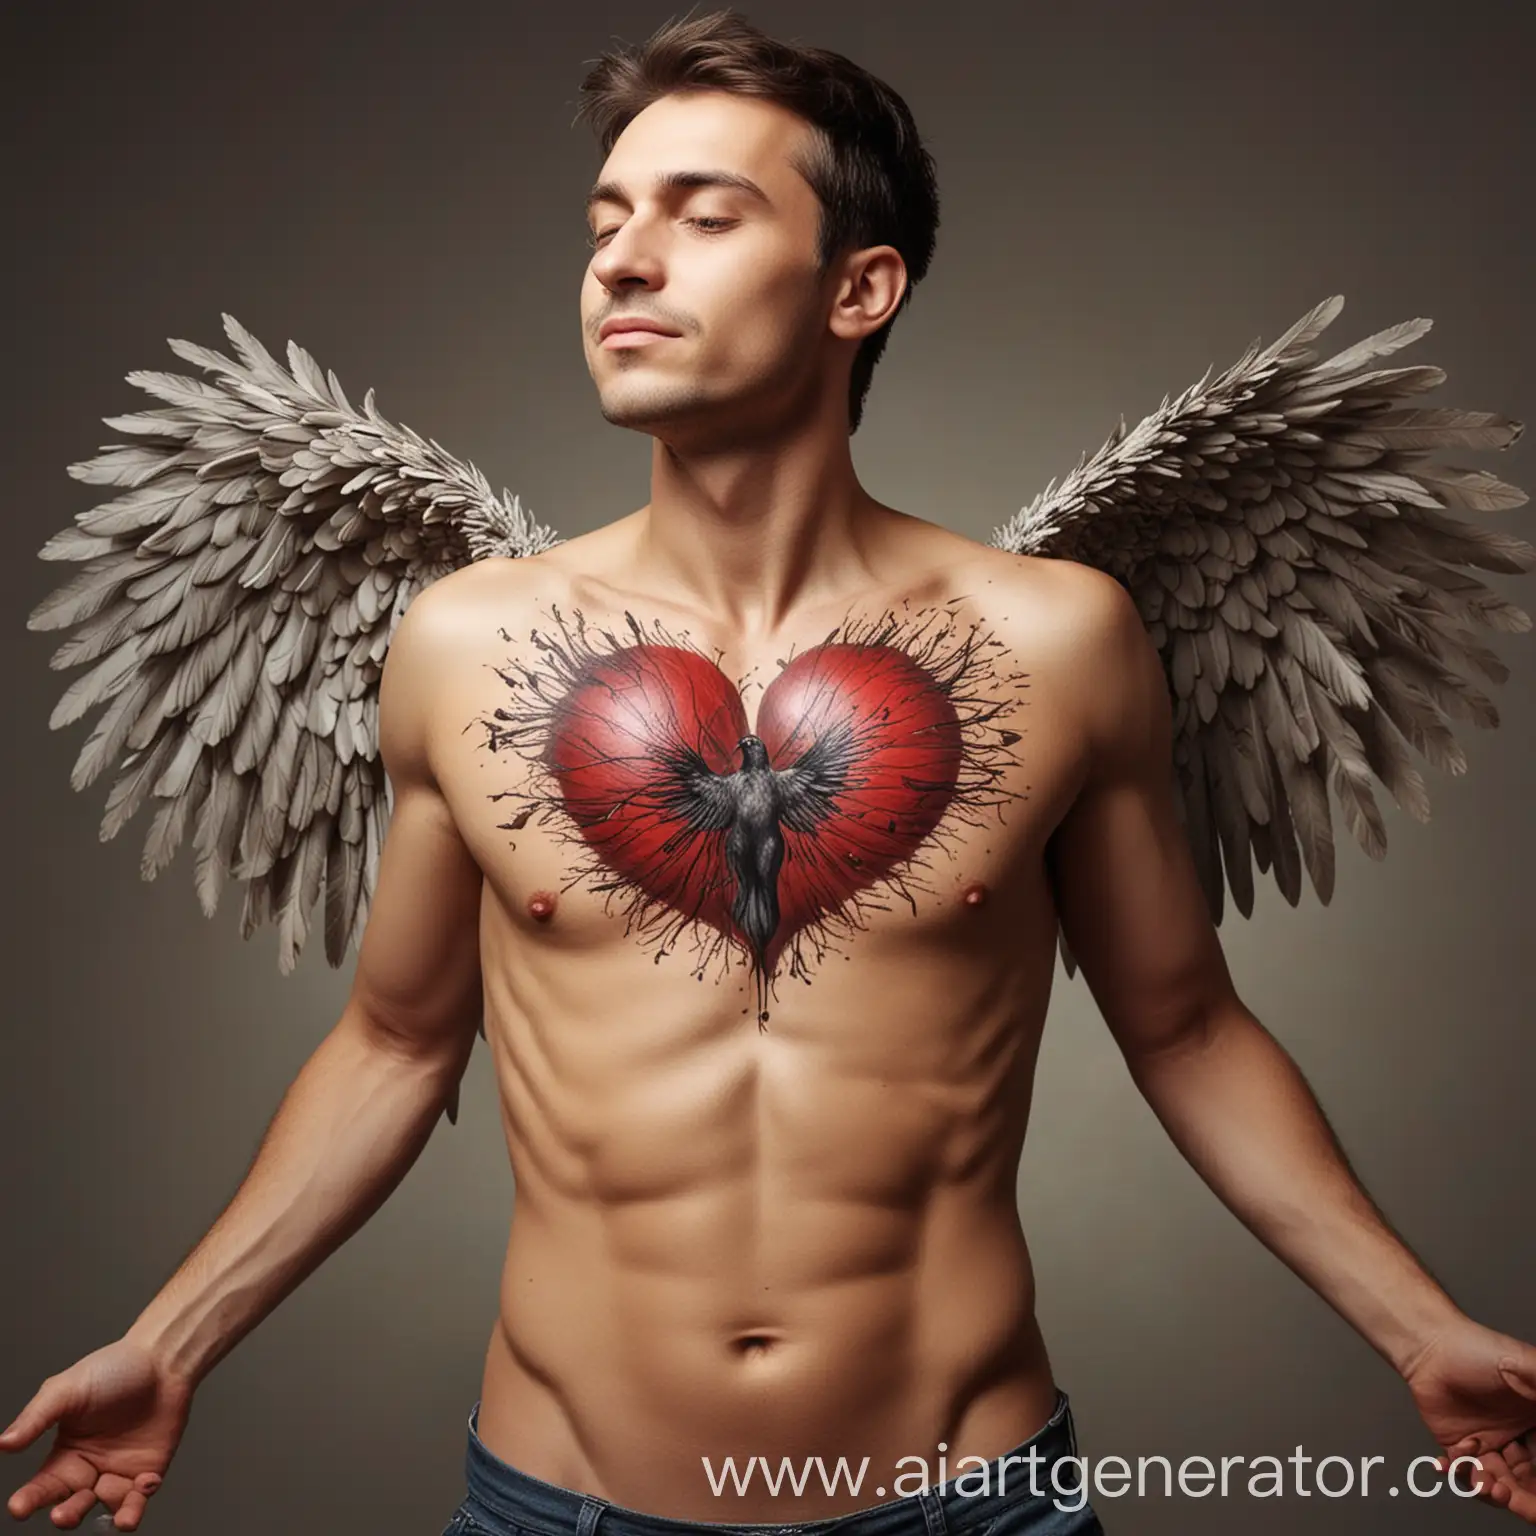 Man-Arching-Back-with-Heart-Transforming-into-Bird